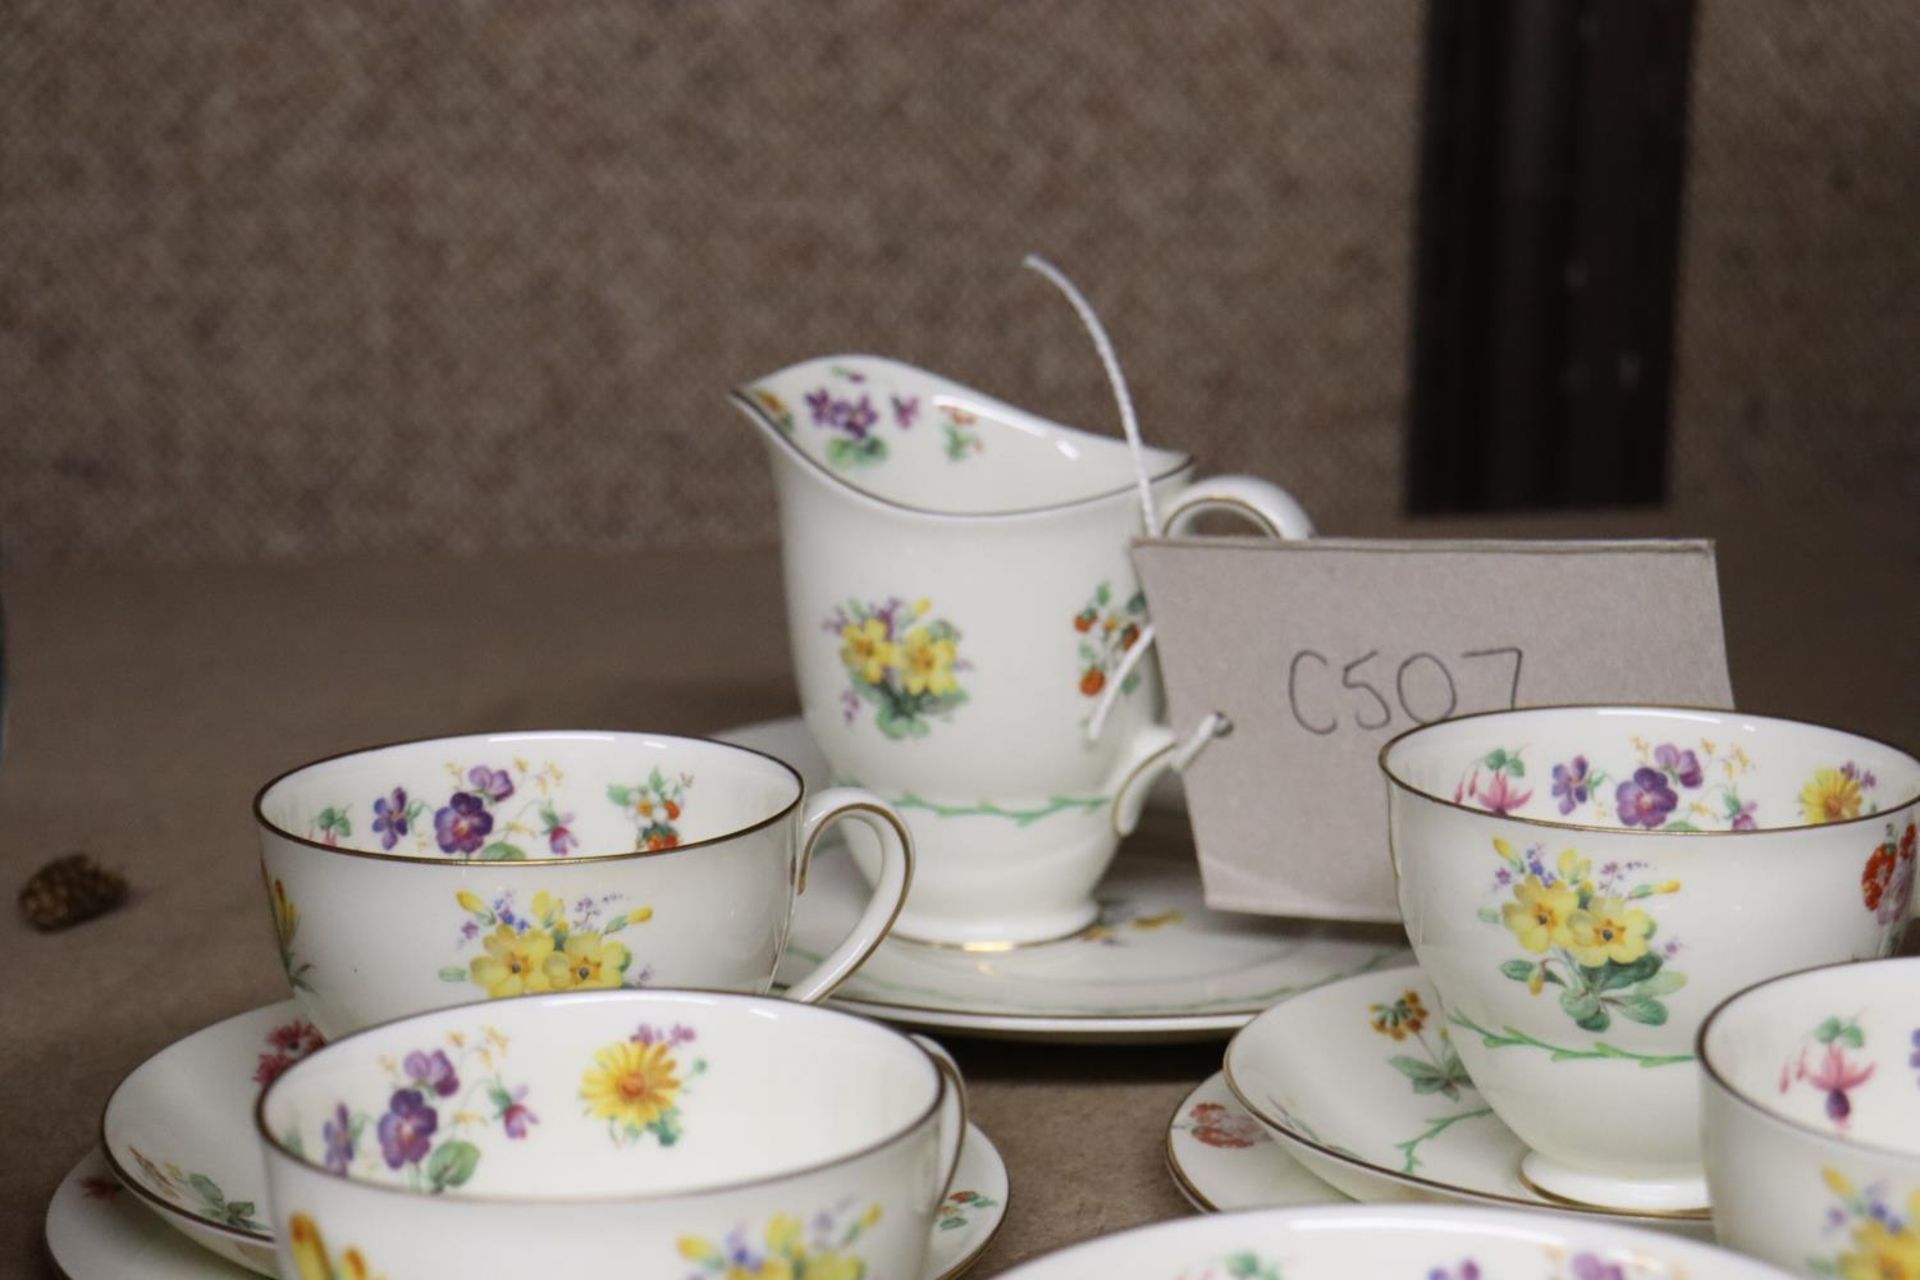 A VINTAGE ROYAL DOULTON TEASET, PALE YELLOW WITH SPRING FLOWERS, TO INCLUDE A CREAM JUG, SUGAR BOWL, - Image 2 of 6